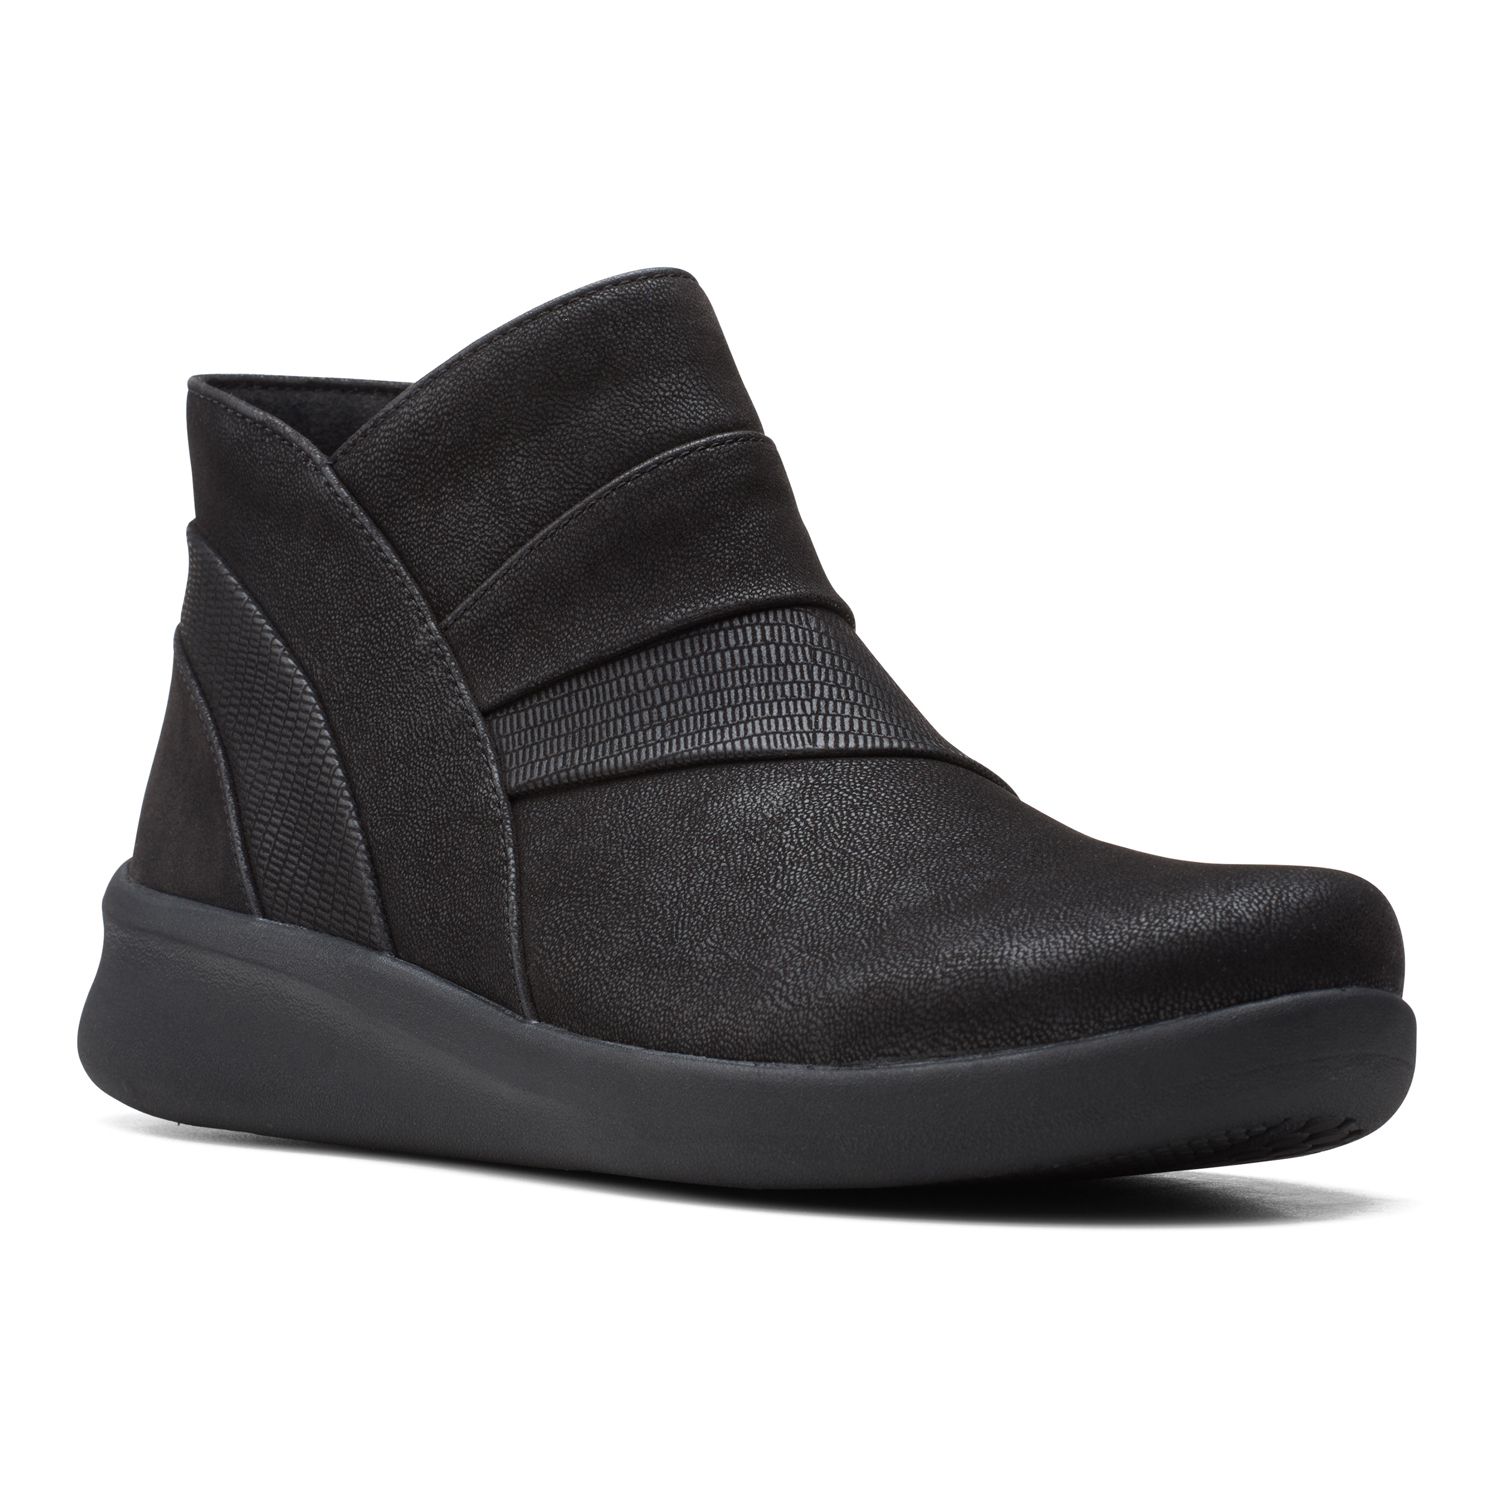 Clarks® Cloudsteppers Sillian 2.0 Rise 